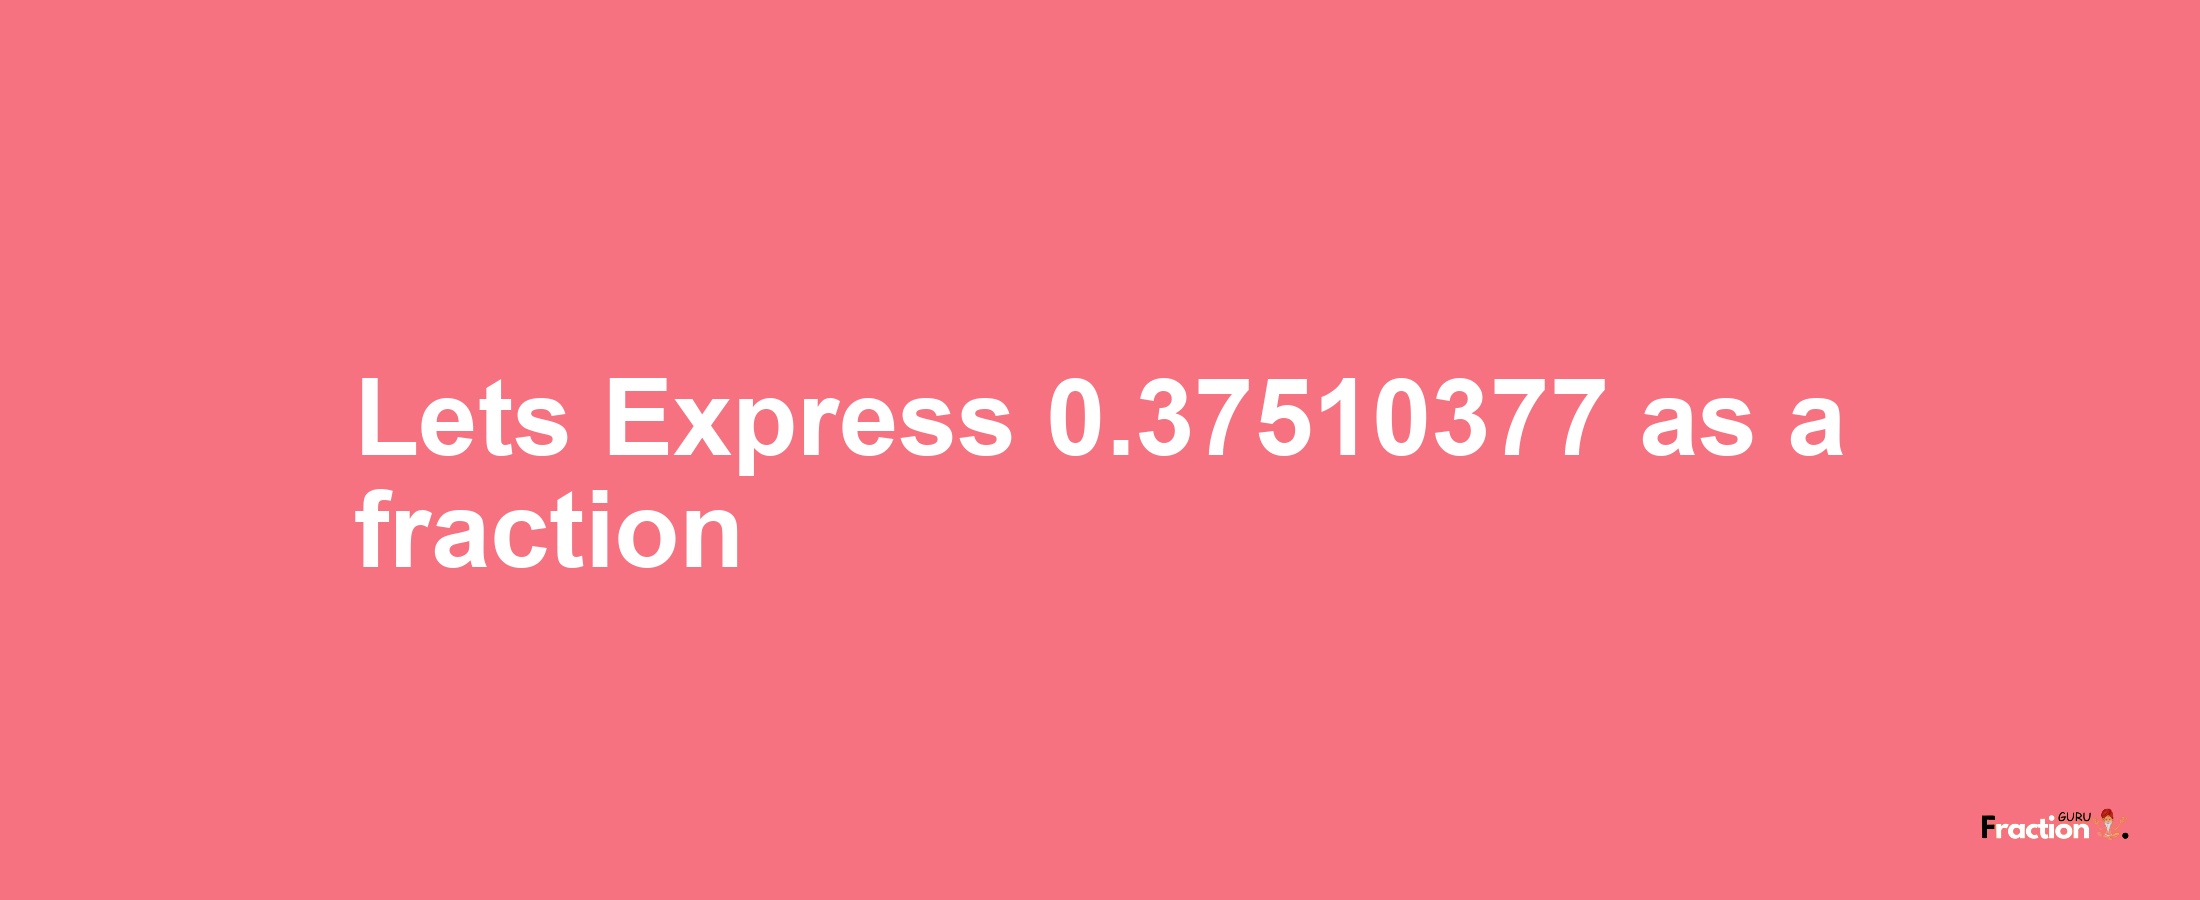 Lets Express 0.37510377 as afraction